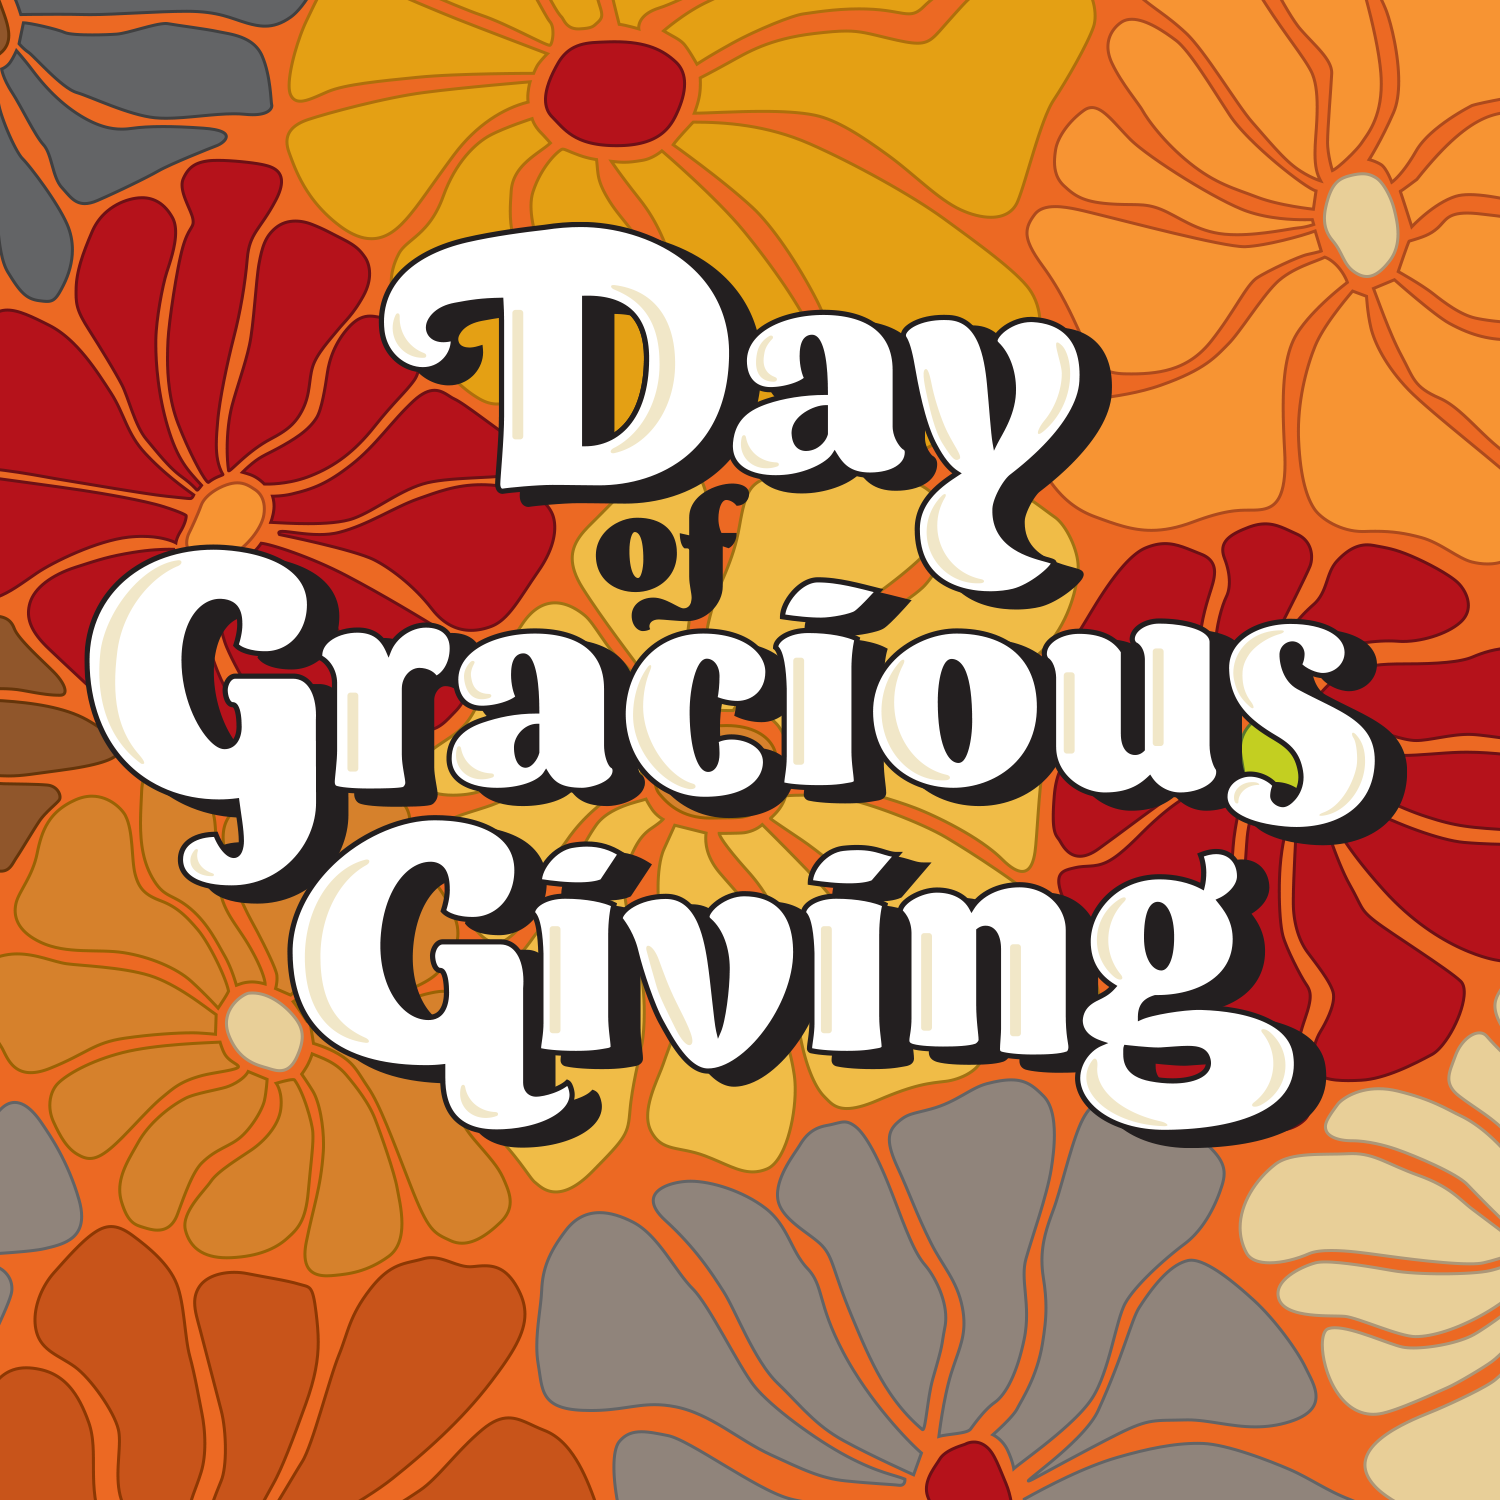 Graphic of colorful flowers says "Day of Gracious Giving"